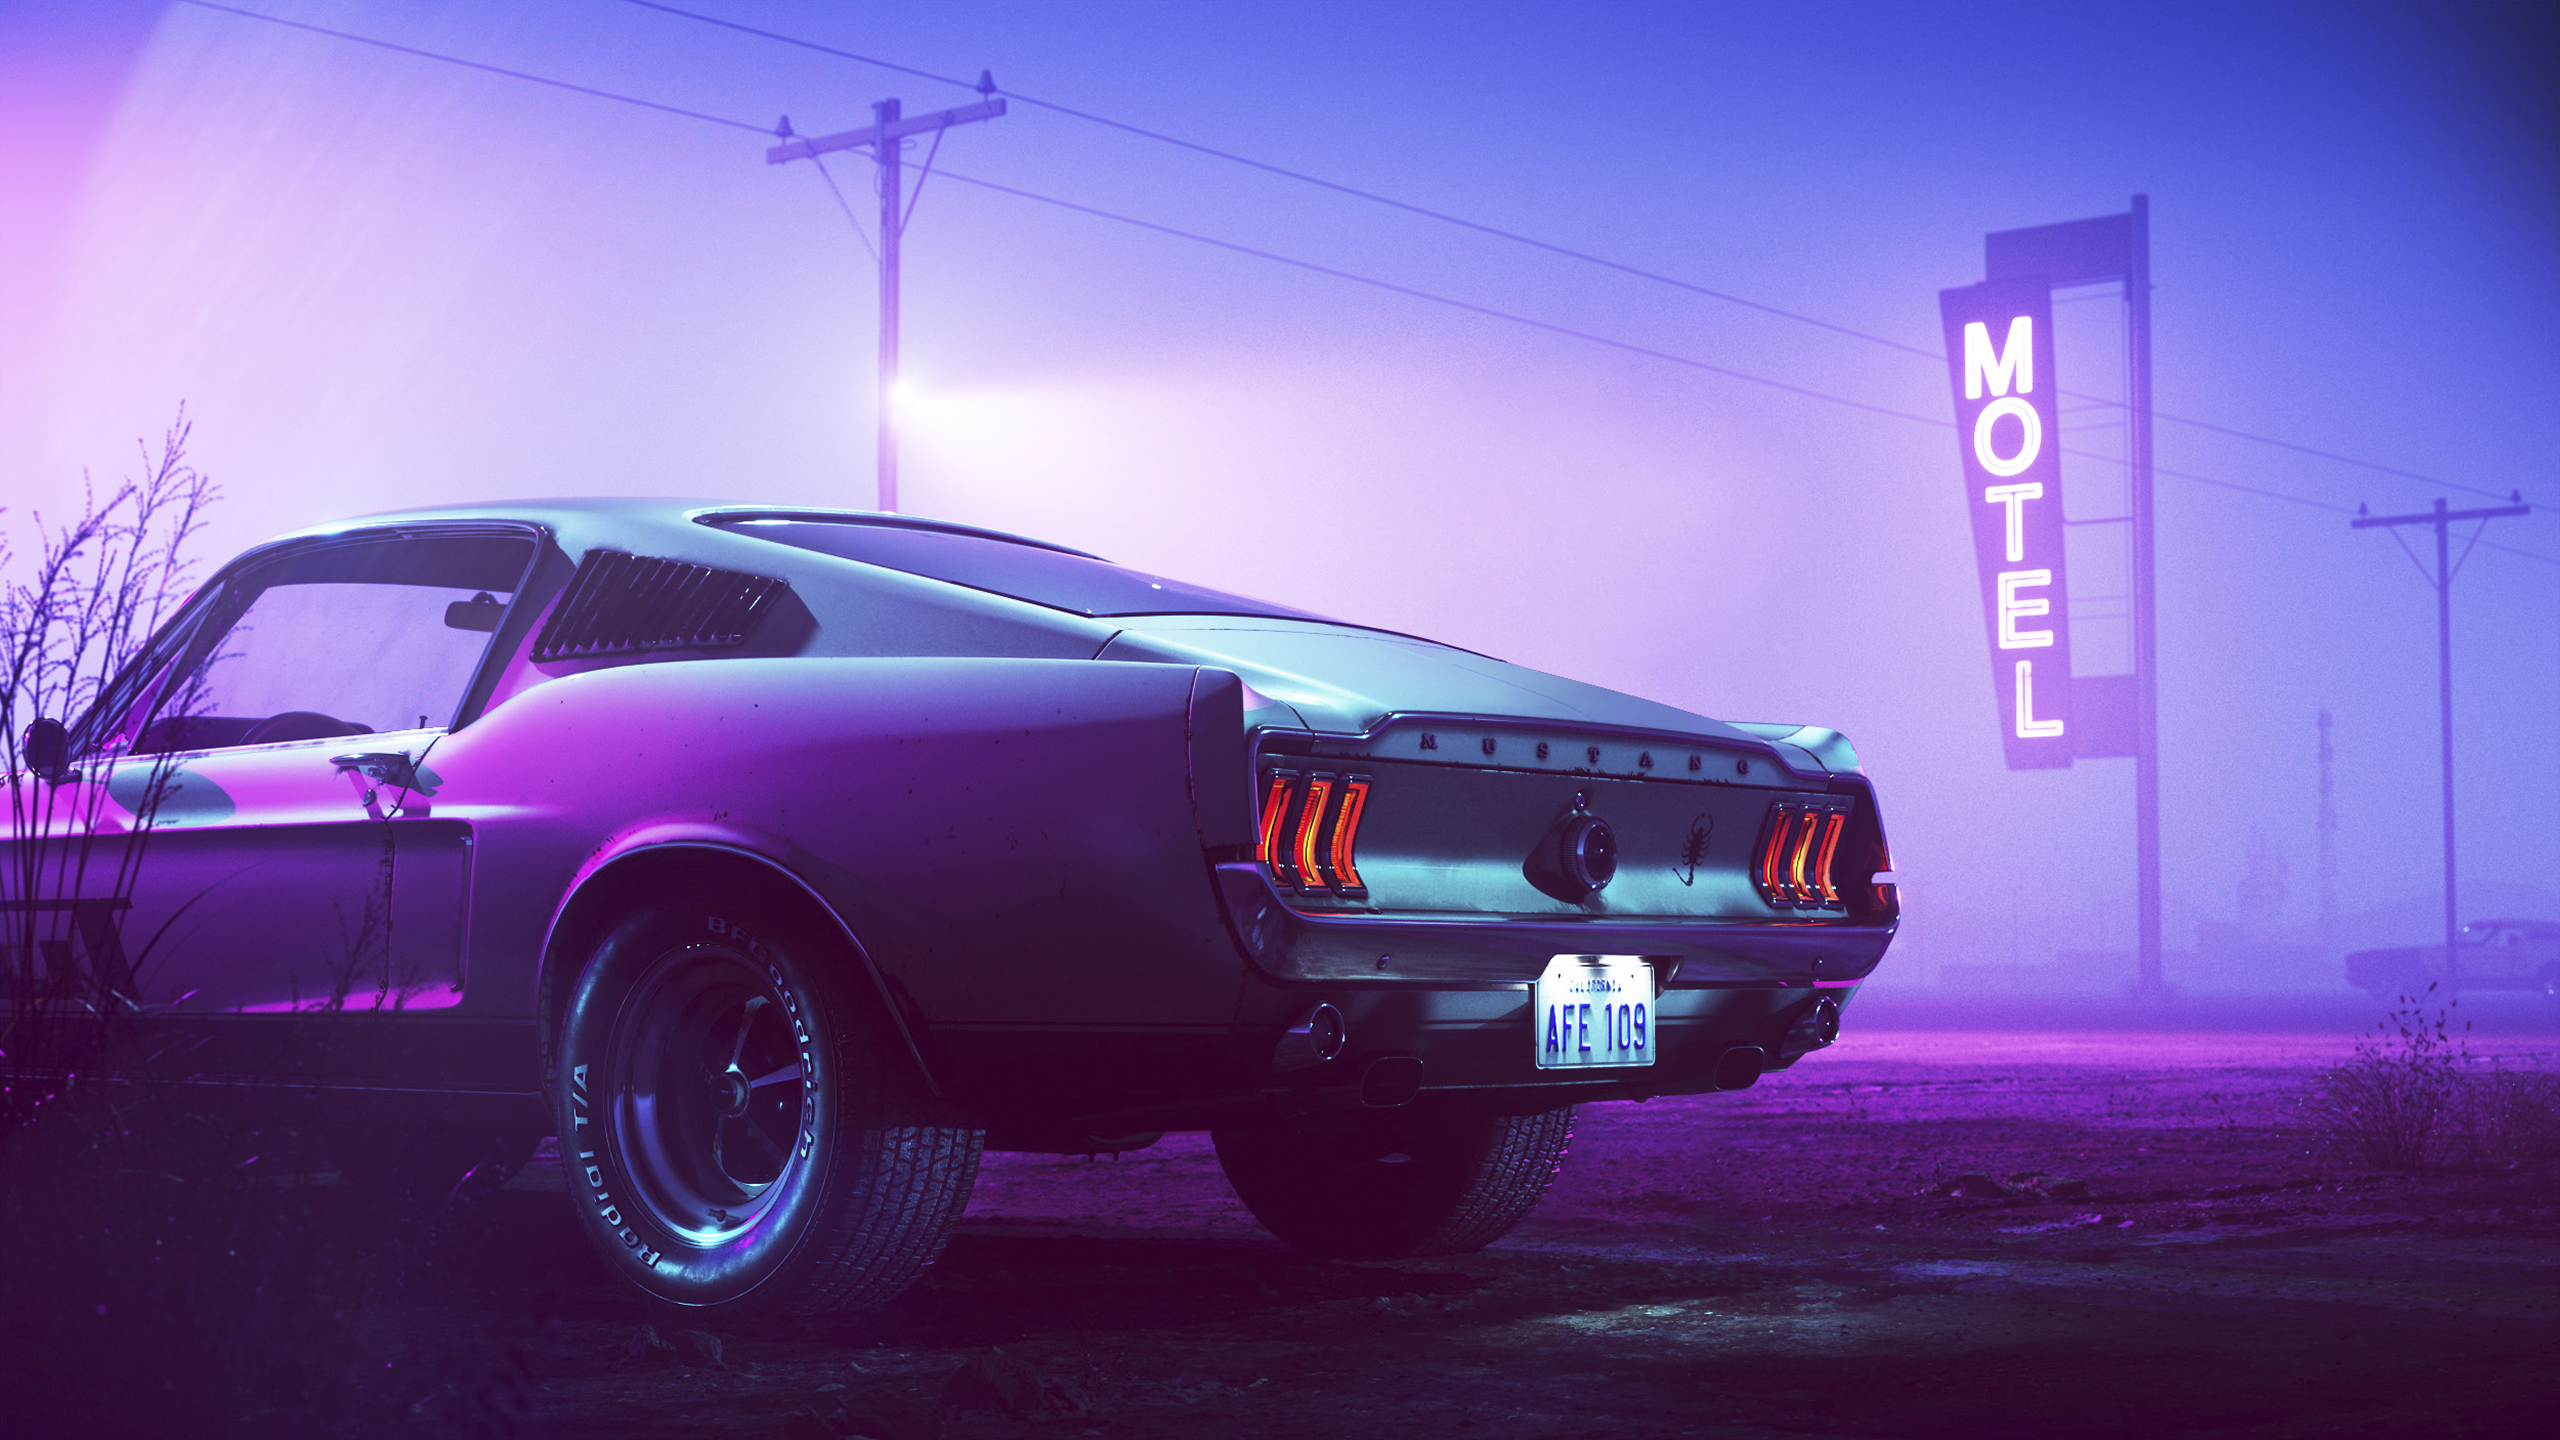 General 2560x1440 retrowave neon synthwave vaporwave Ford Mustang car taillights licence plates Colorsponge Carlos